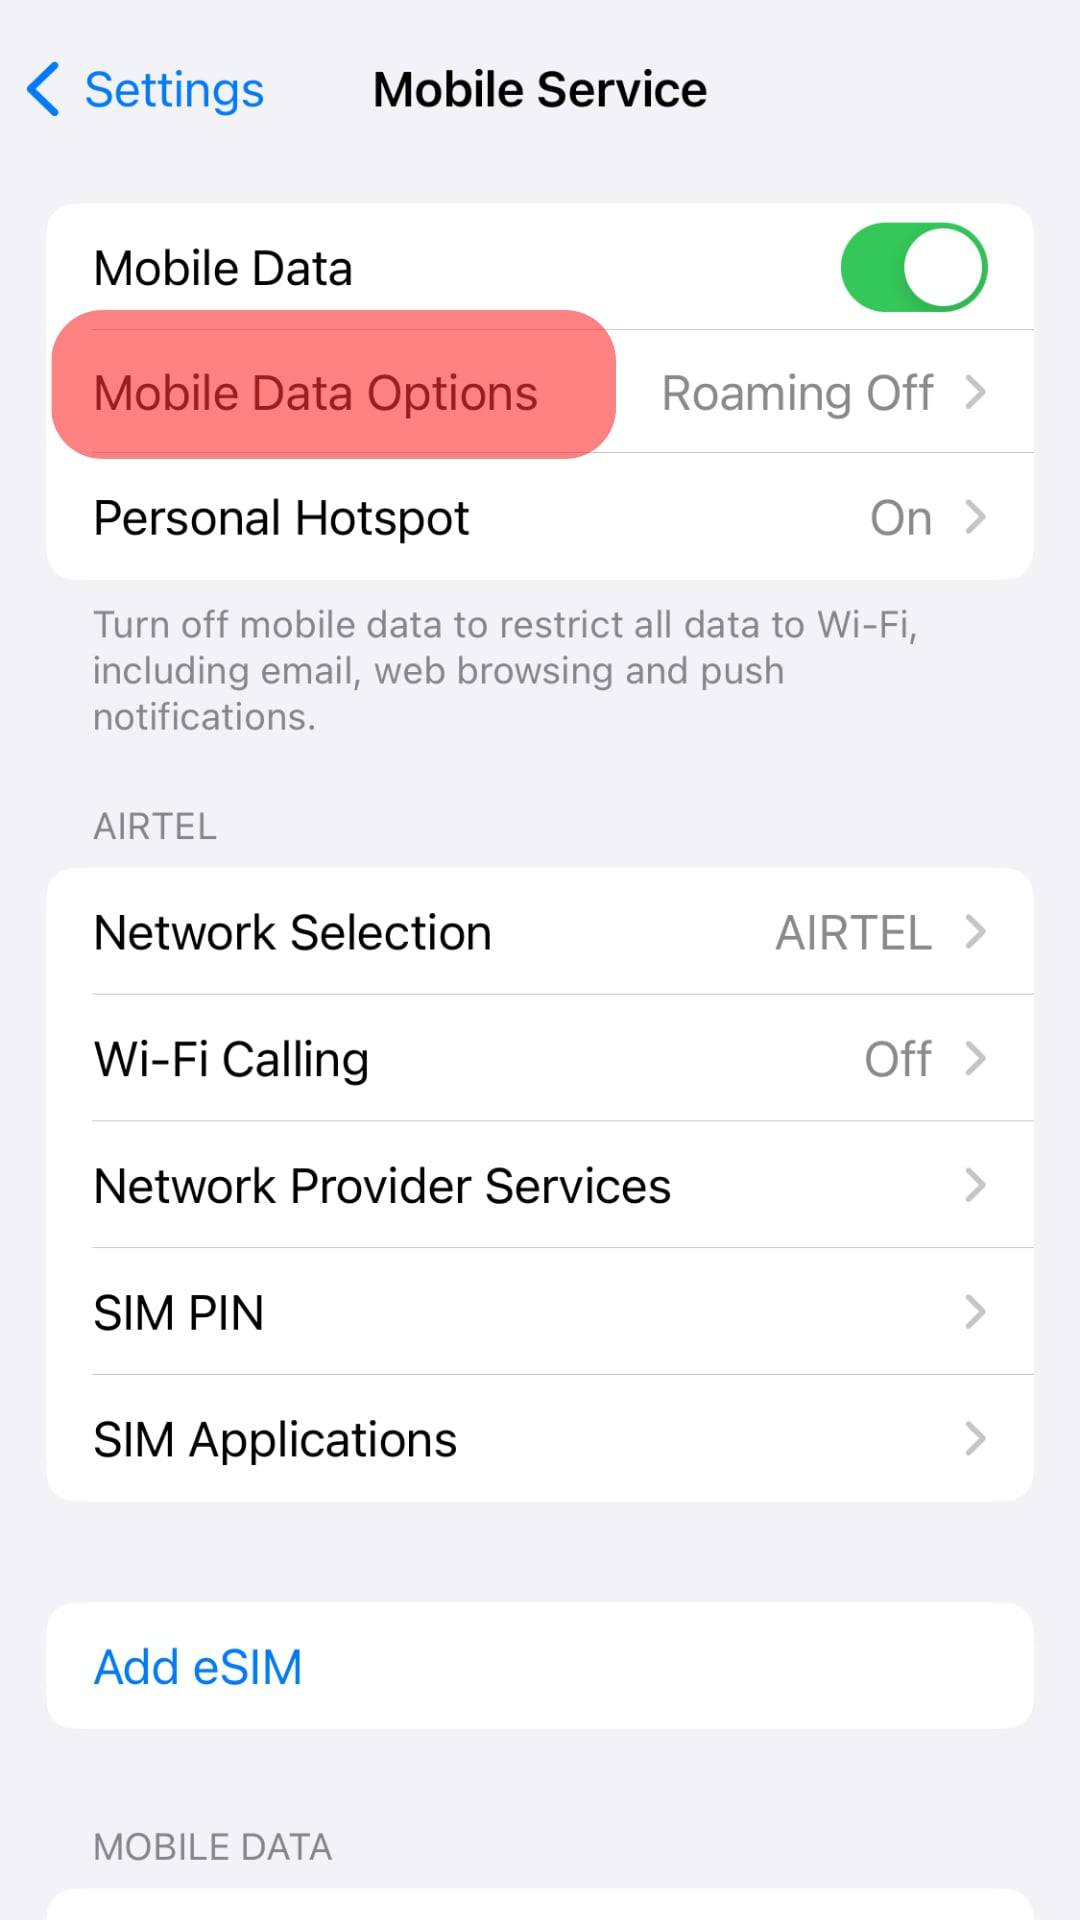 Tap On Mobile Data Options.